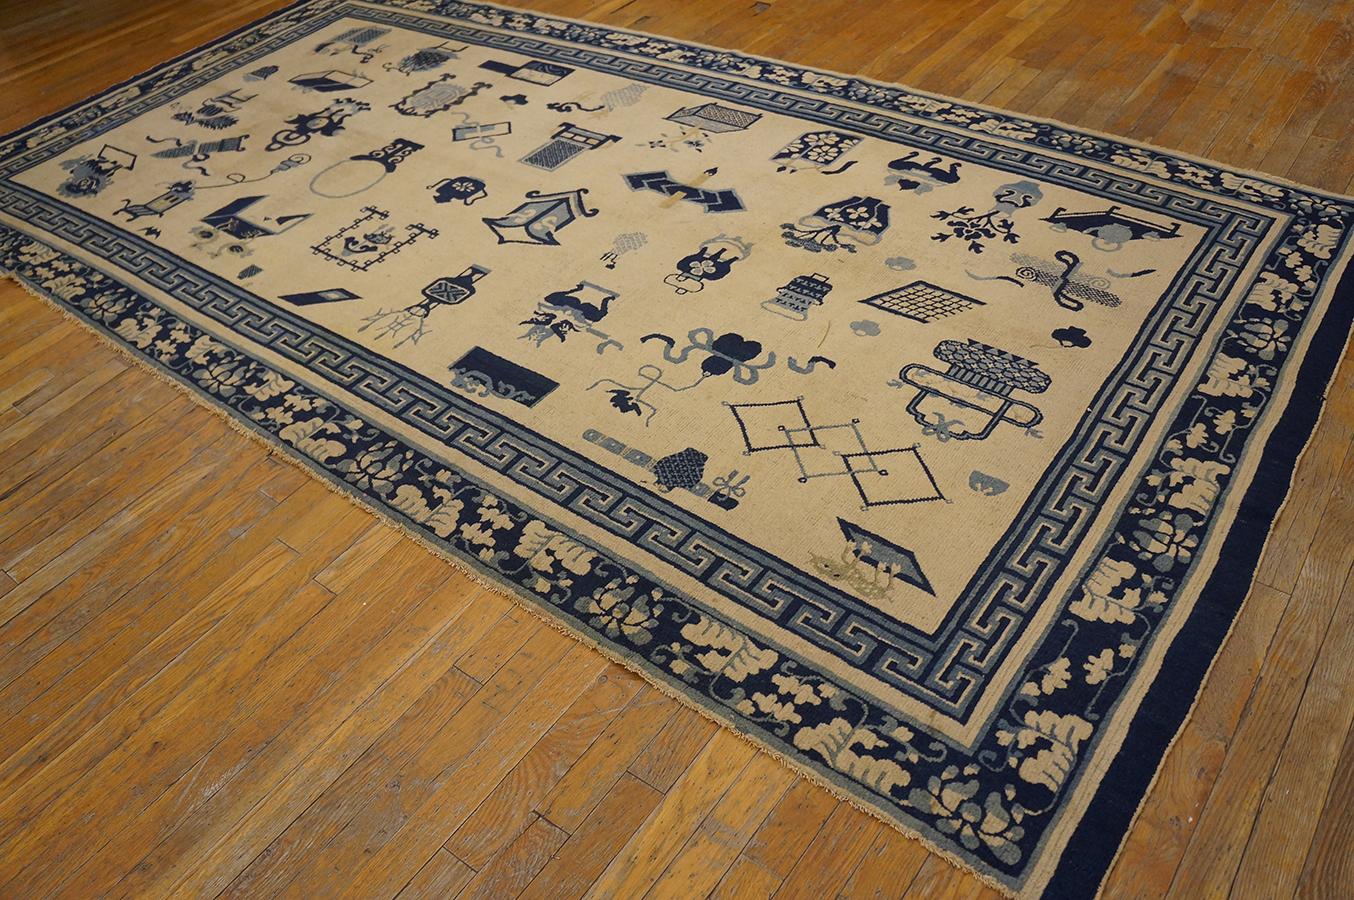 Late 19th Century Mid 19th Century Chinese Ningxia Carpet ( 5' 6'' x 10' 7'' - 167 x 322 cm ) For Sale